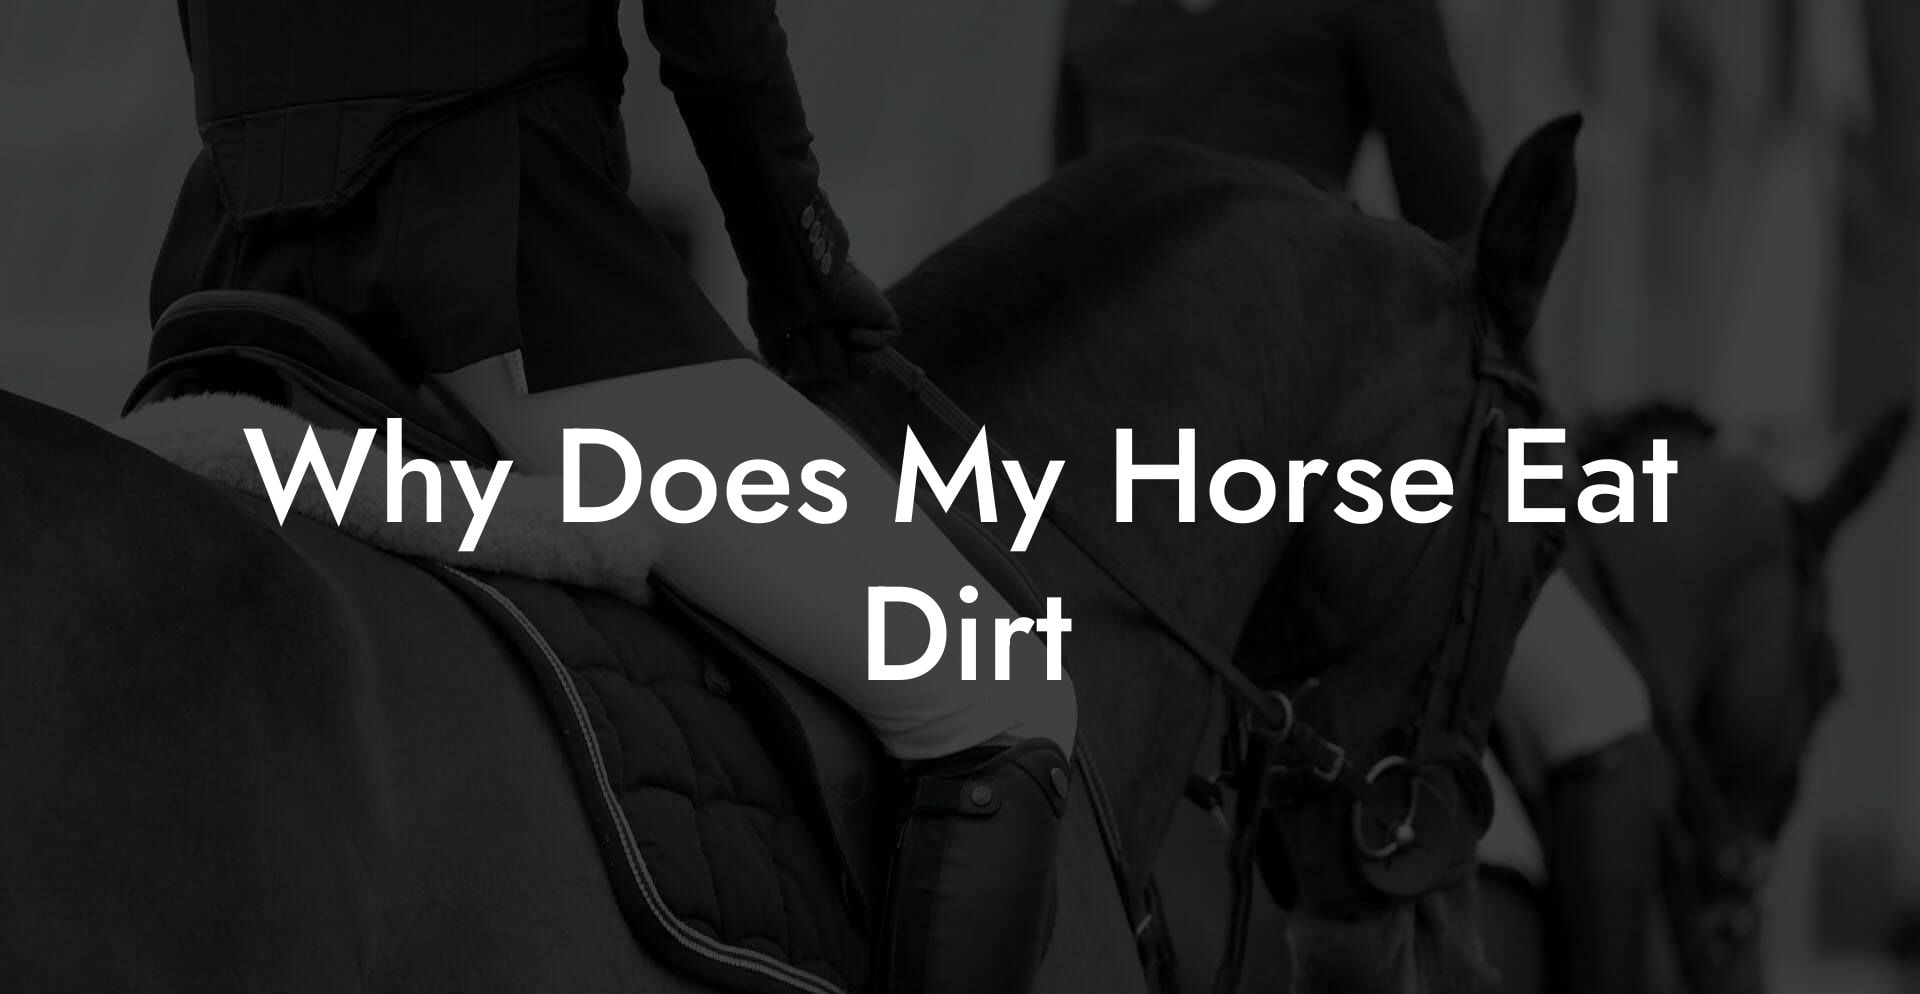 Why Does My Horse Eat Dirt